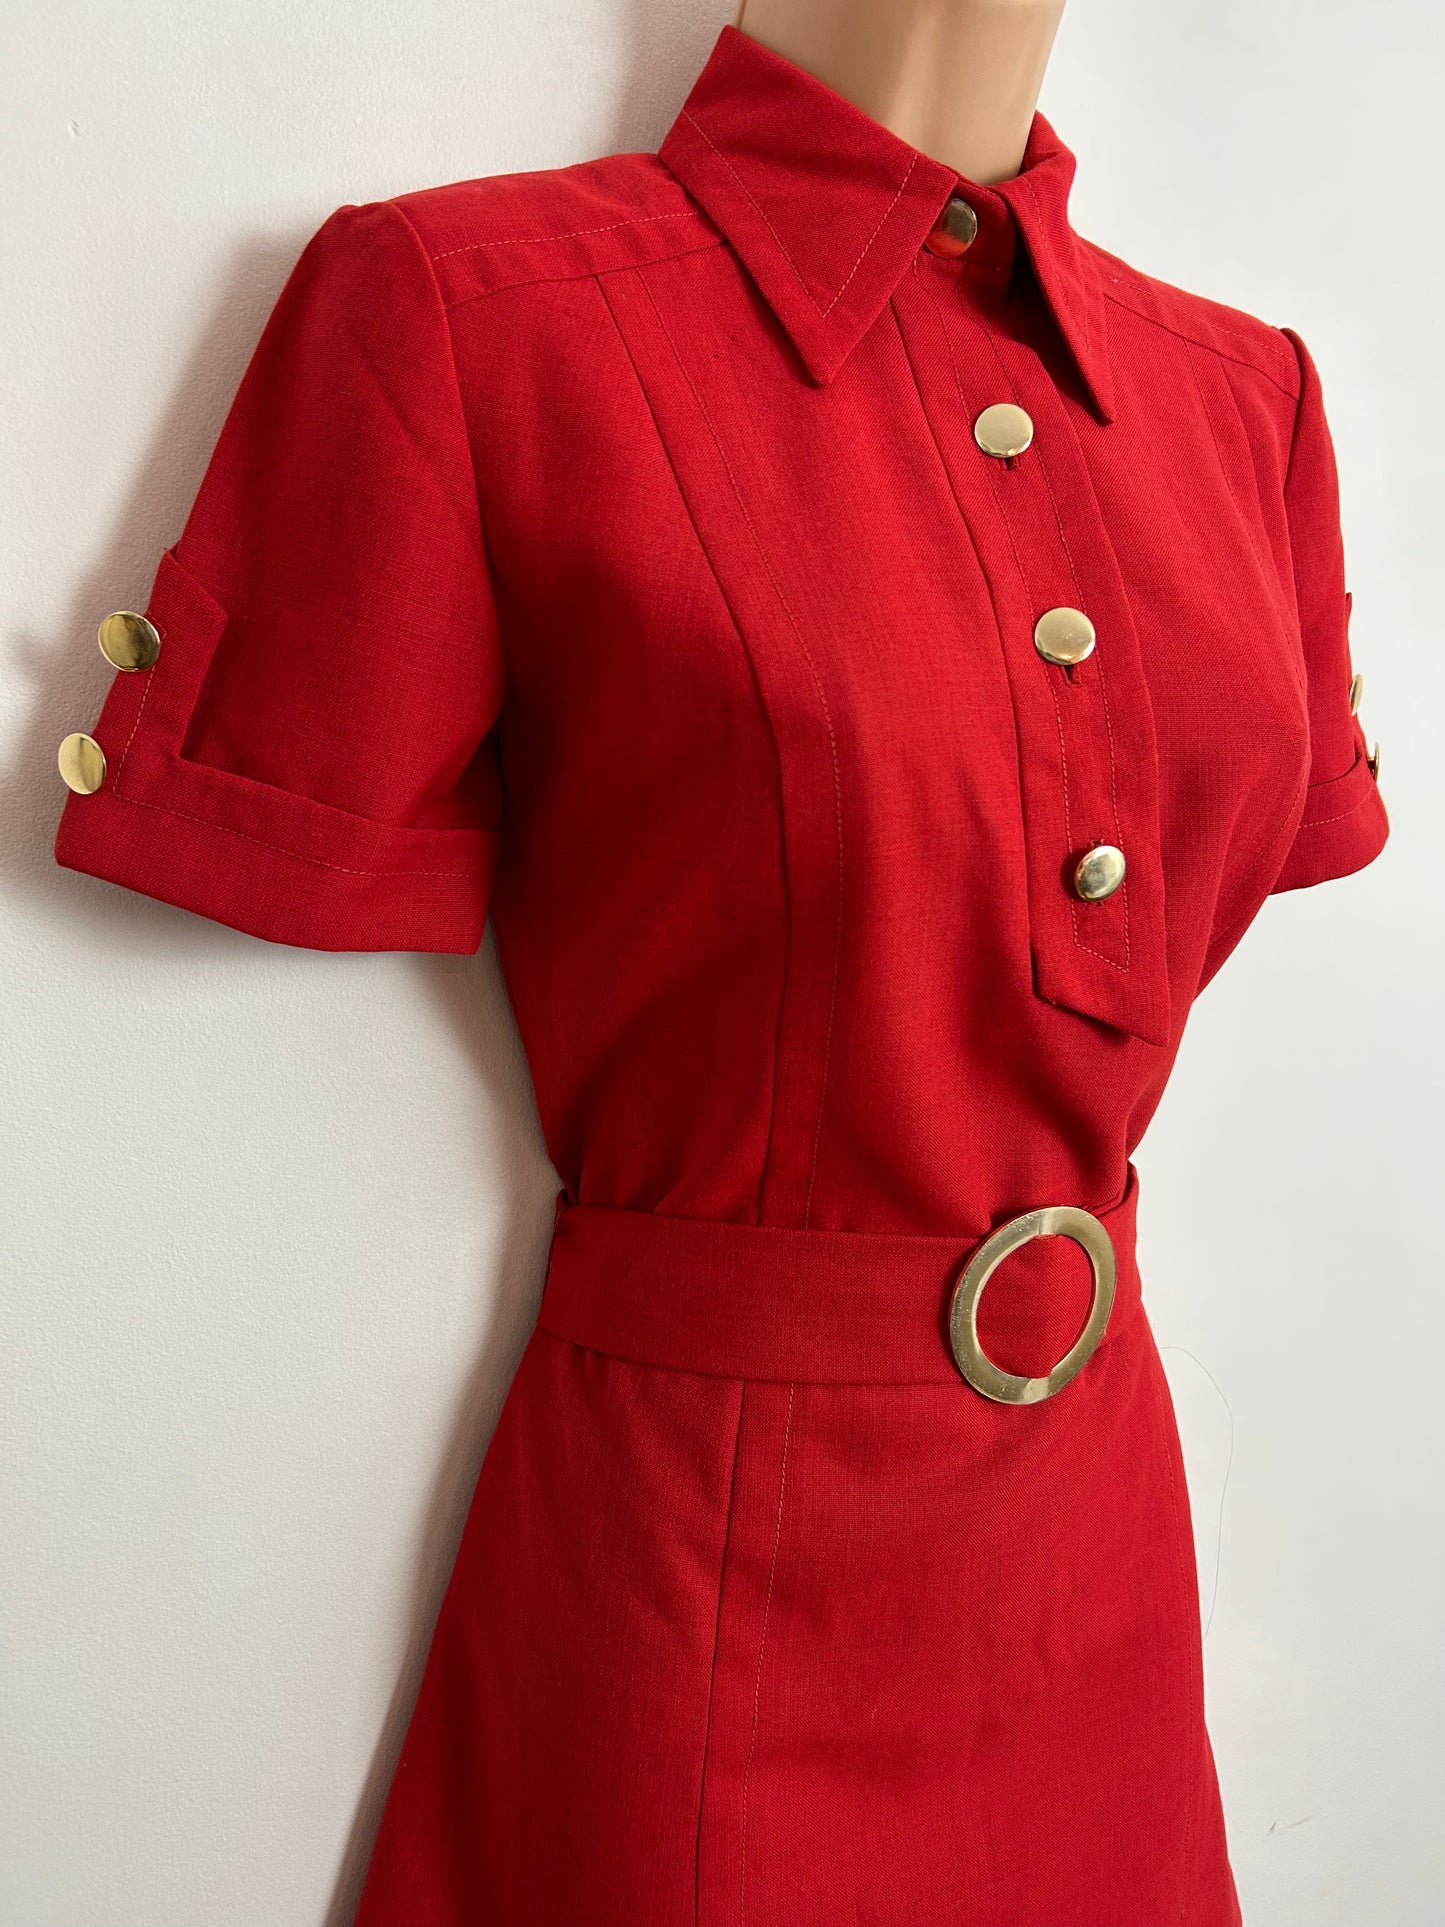 Vintage Early 1970s UK Size 8-10 Red Cotton Mix Shirt Style Belted Mini Mod Dress